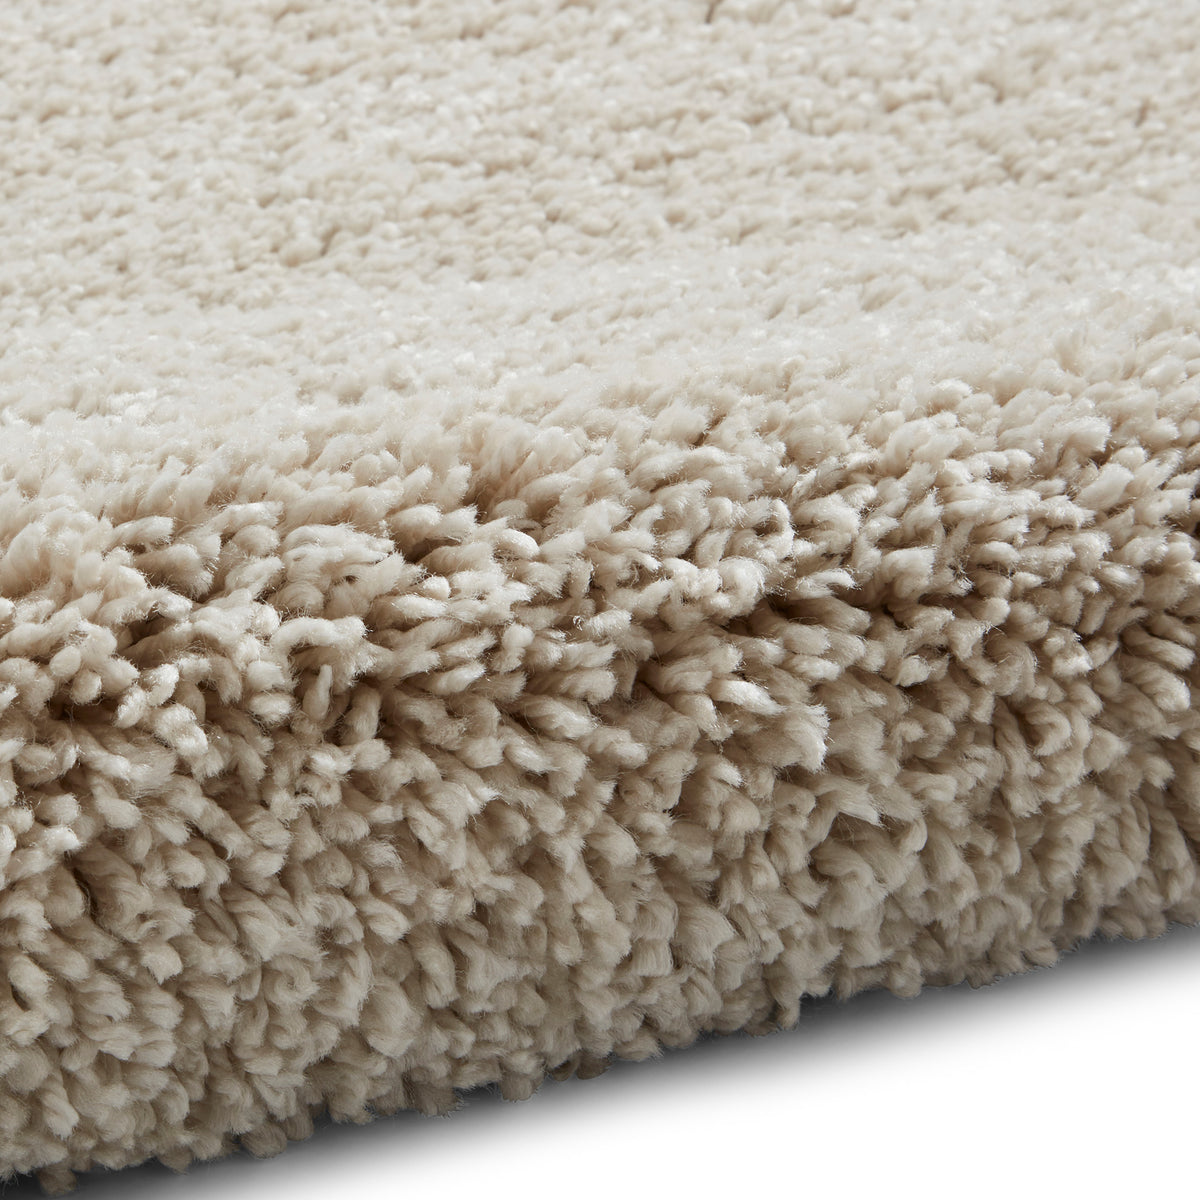 Roswell Cream Stain Resistant Shaggy Rug 